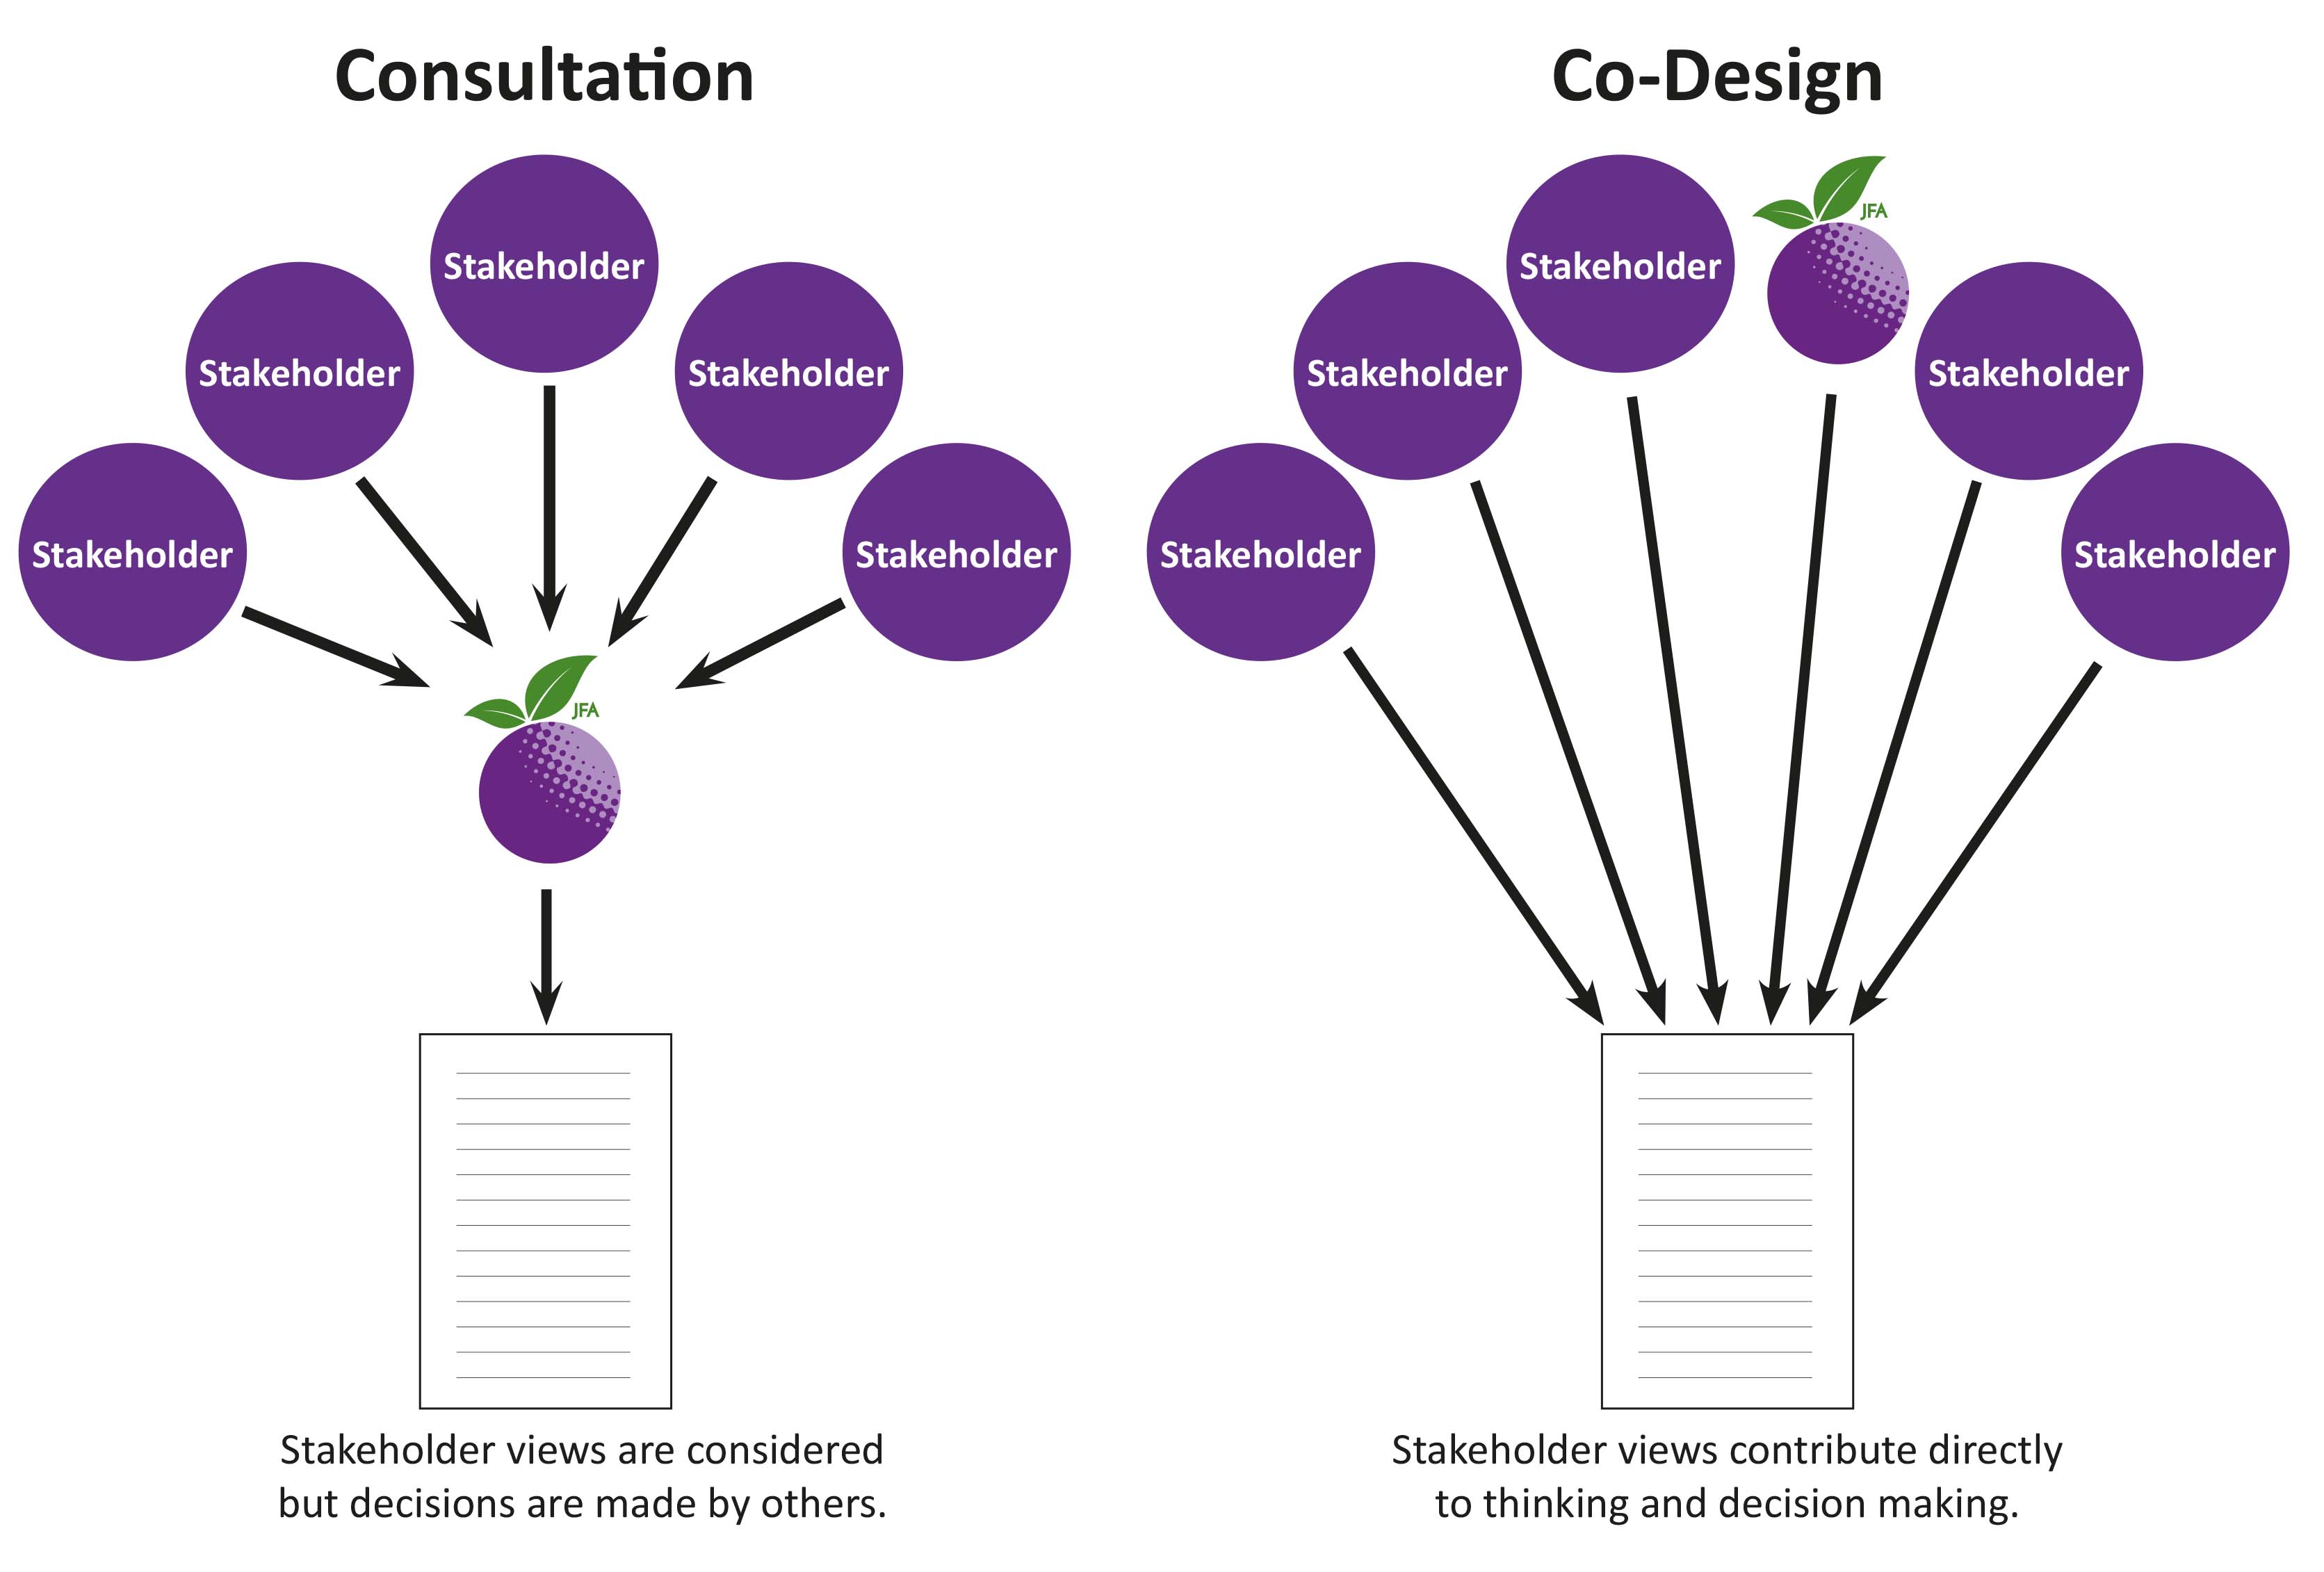 Image is diagram of co-design group